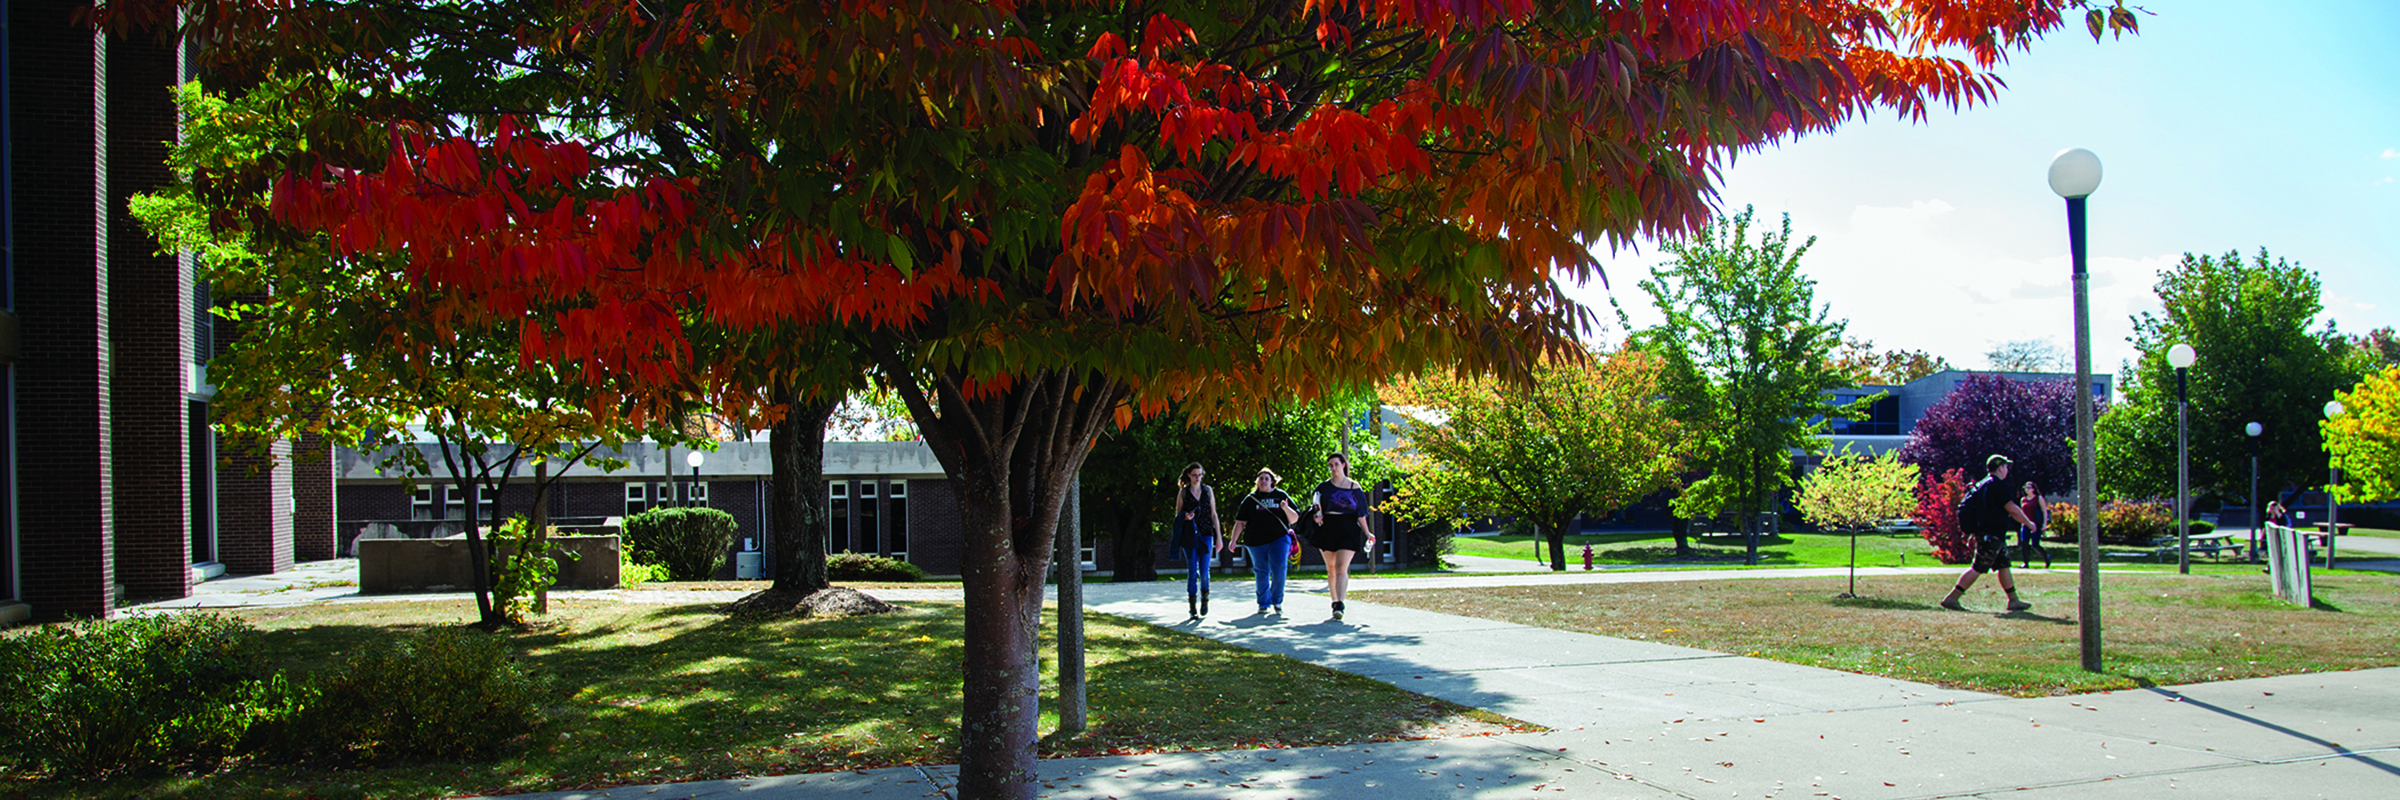 students on campus outside in fall with bright tree